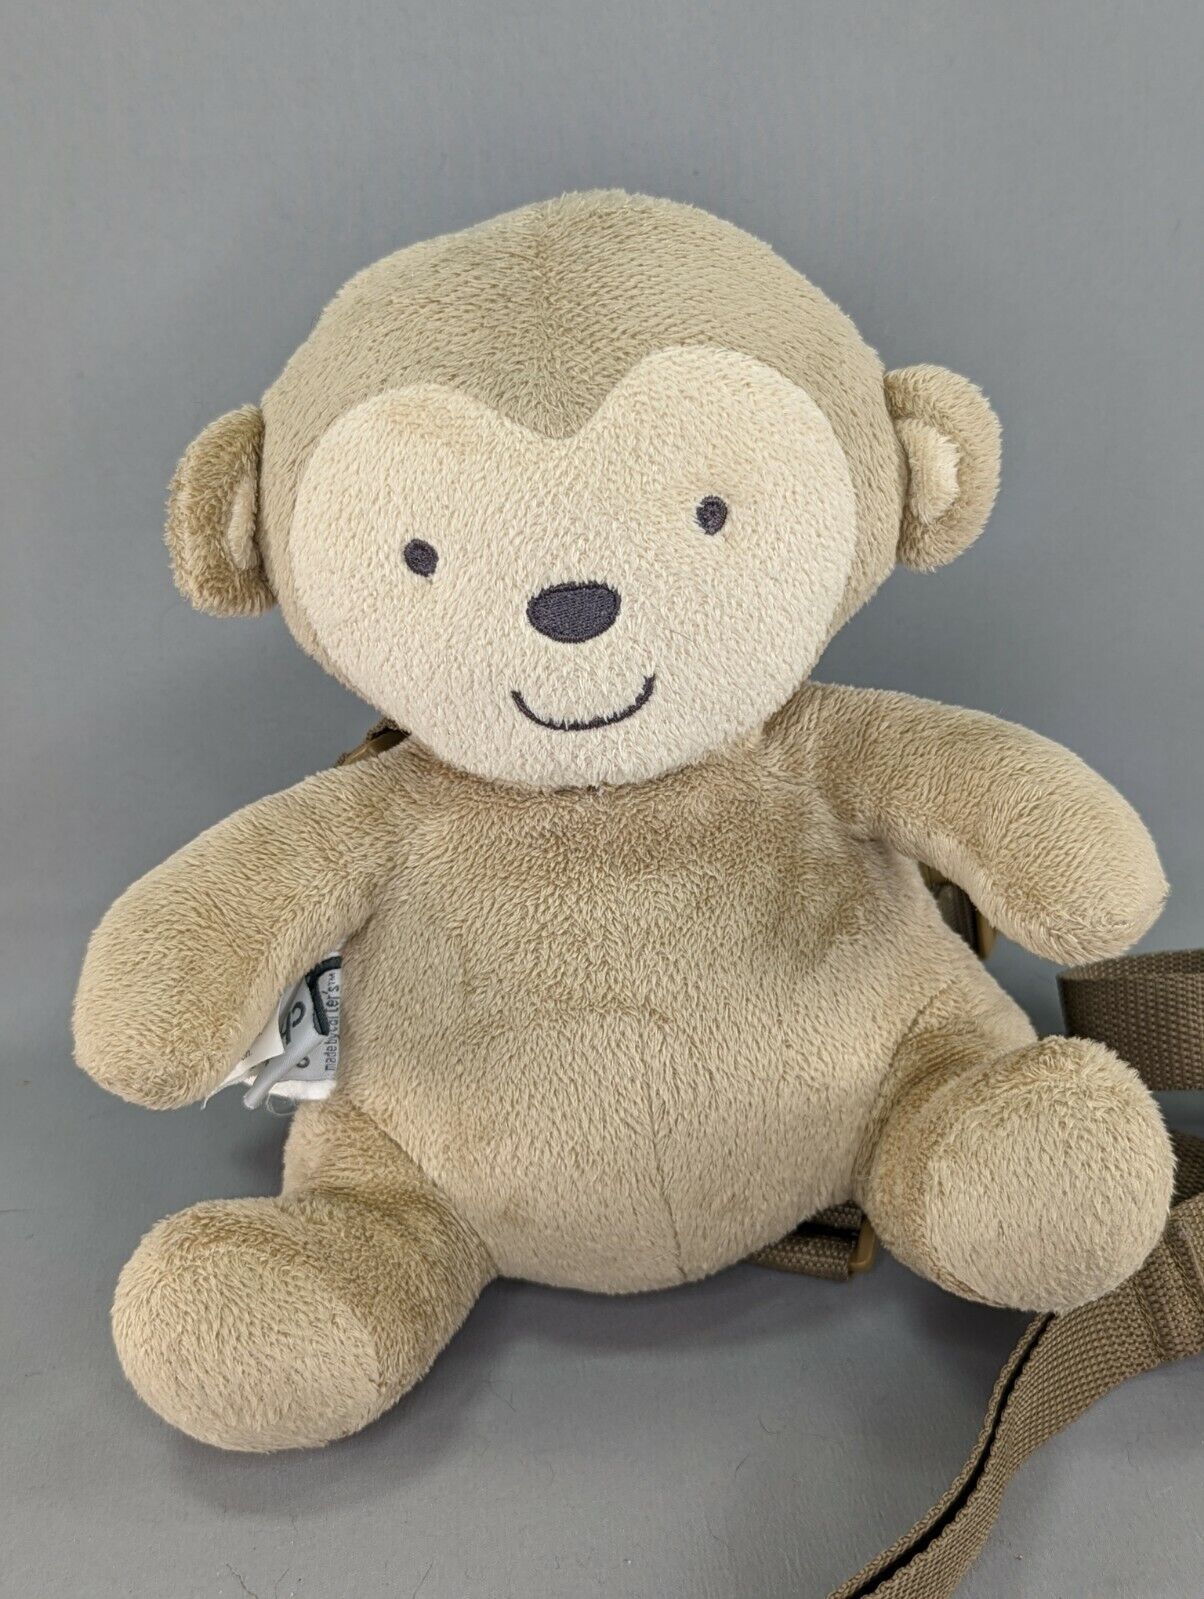 Carters Child Of Mine 2-in-1 Child Safety Security Harness Buddy Monkey W/ Leash